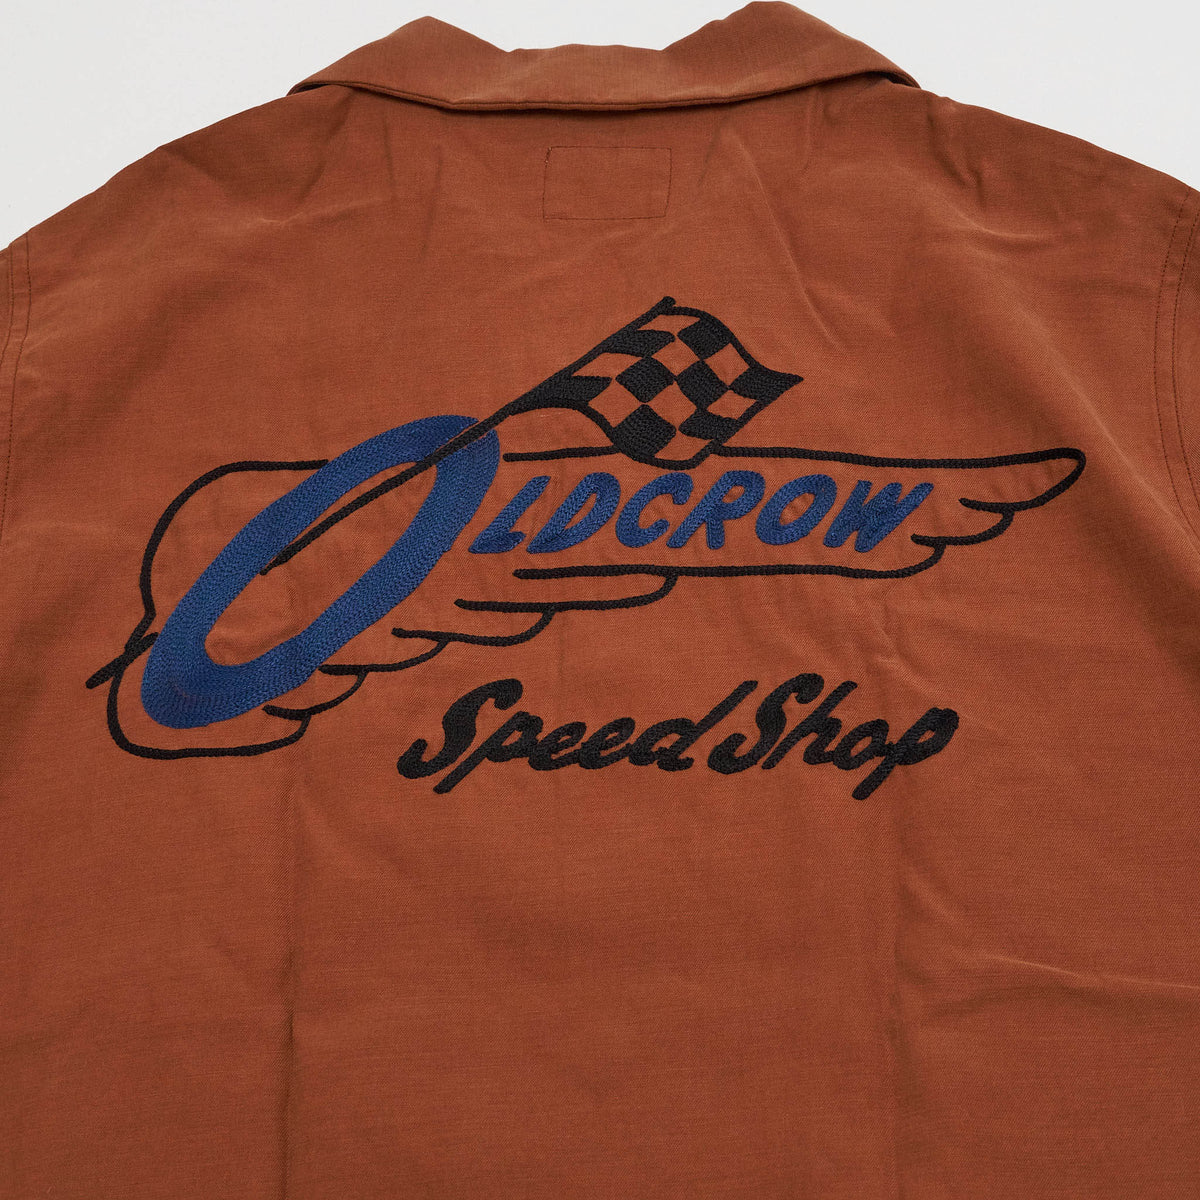 Old Crow Speed Shop by Glad Hand &amp; Co. Rod Garage Shirt